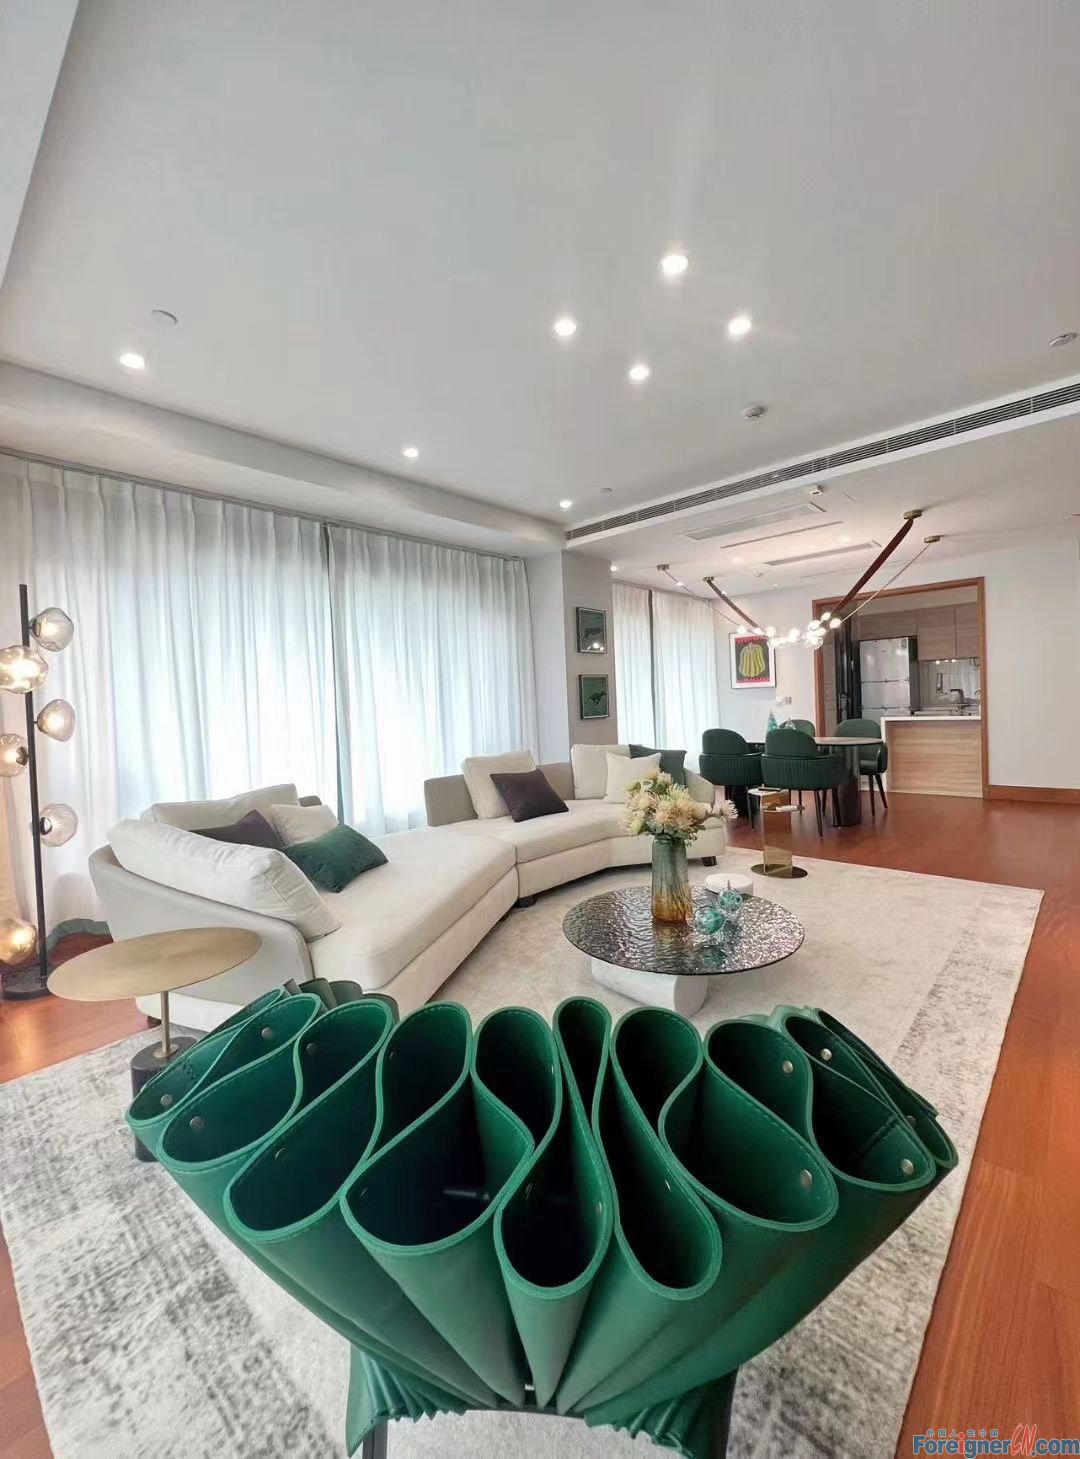 Luxurious！ Eslite Residence apartment to rent in SIP/ Floor heating and central AC/lots of light room/Nearby Jinji Lake and Moon habor,Time Square,Subway line 1